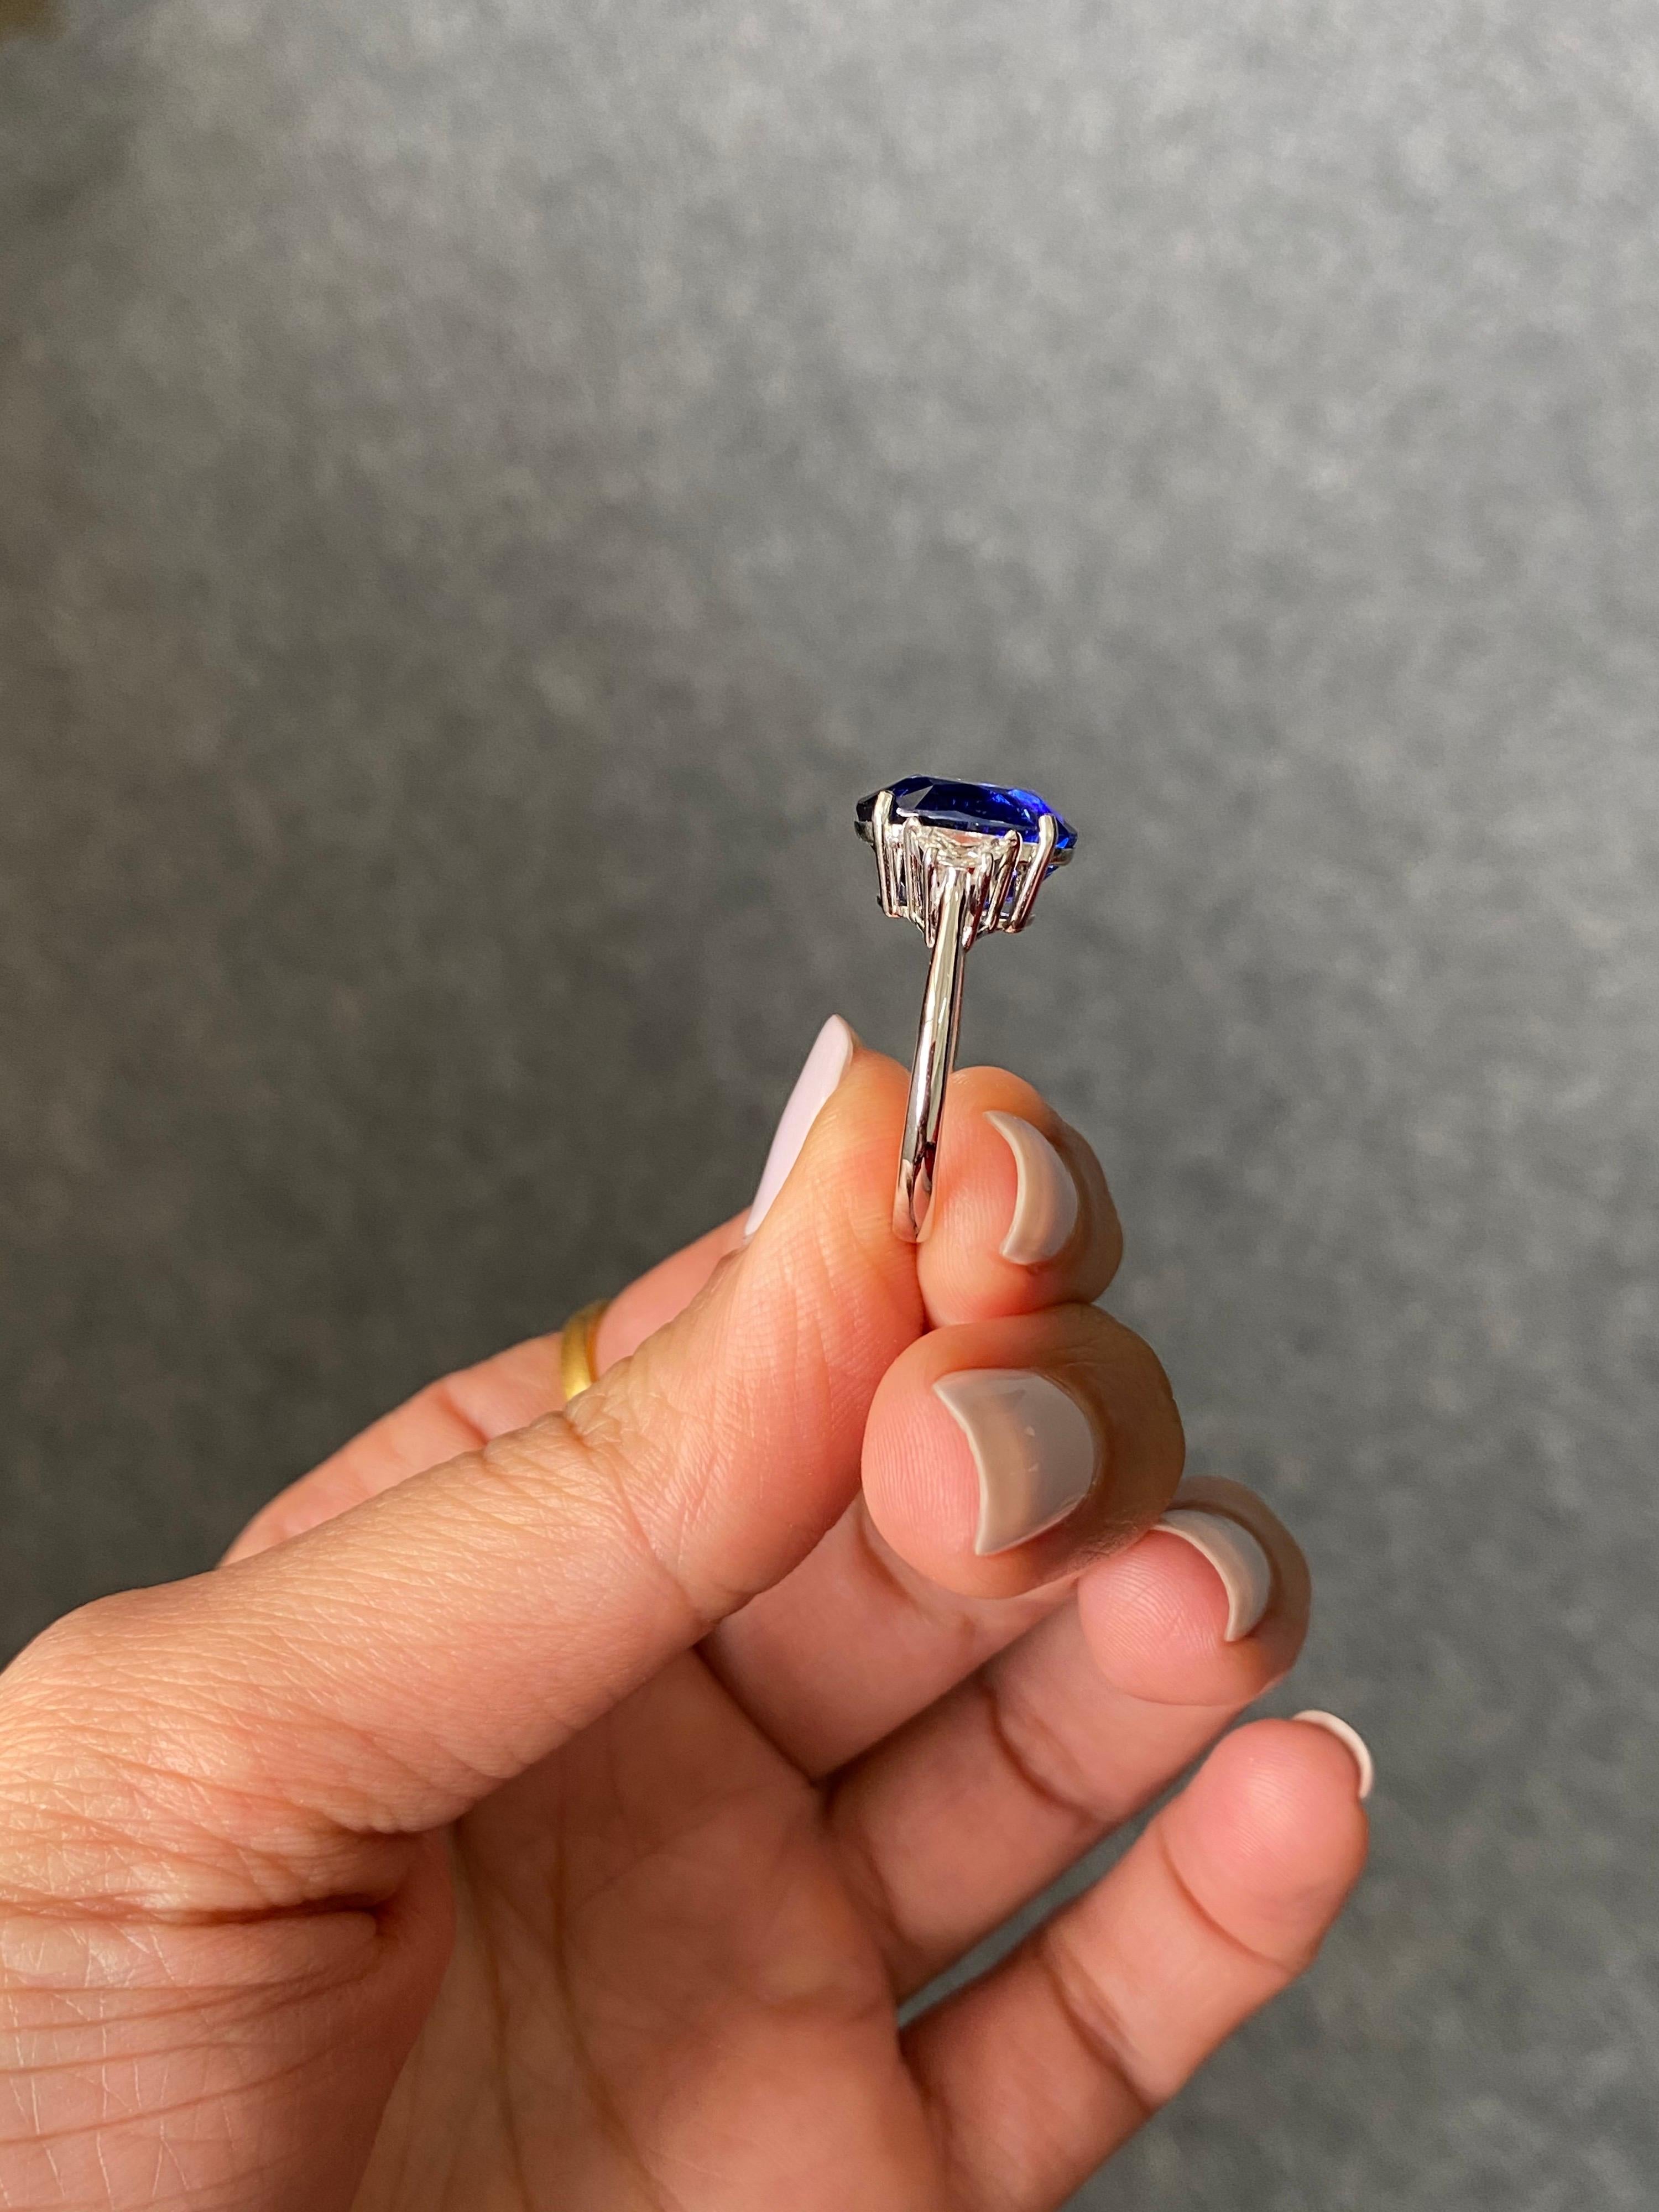 A classic three-stone engagement ring, with a 6.53 carat oval shape Ceylon (Sri Lankan) Blue Sapphire, and 0.36 carat colorless VS quality trapezium Diamonds. The centre stone has no inclusions, and great luster and color, and the stones are set in